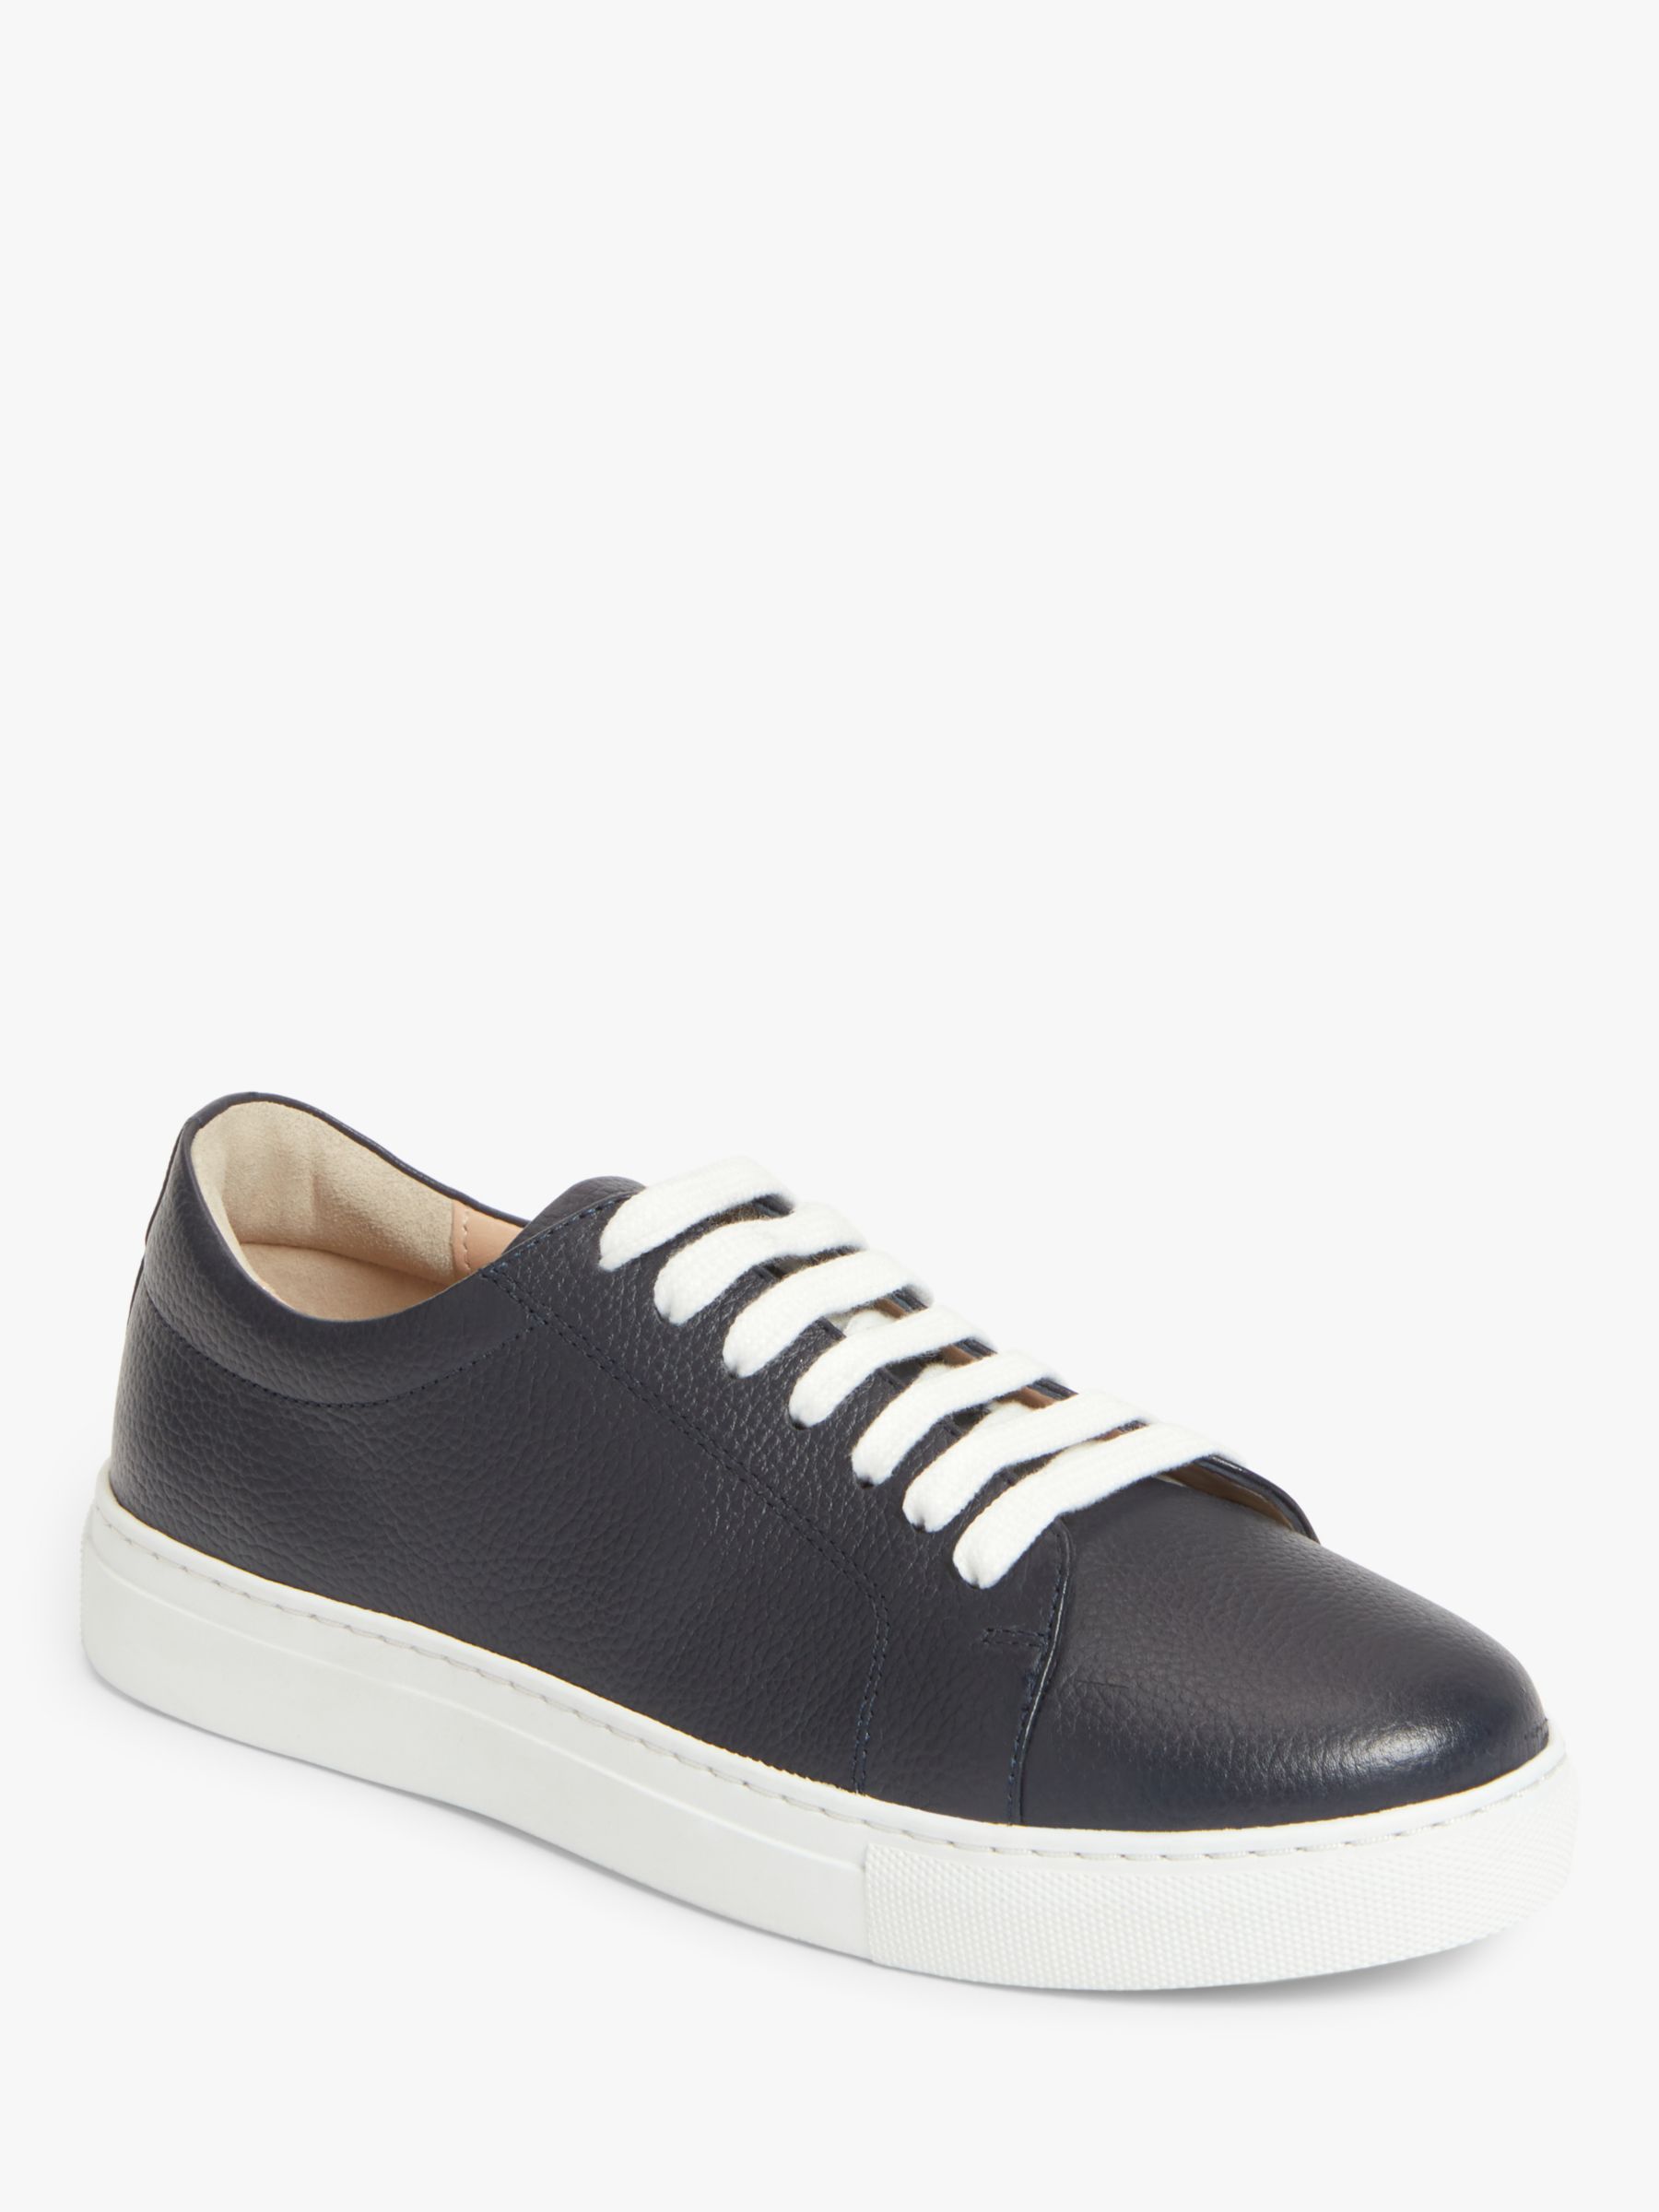 John Lewis Florette Wide Fit Leather Trainers, Navy at John Lewis ...